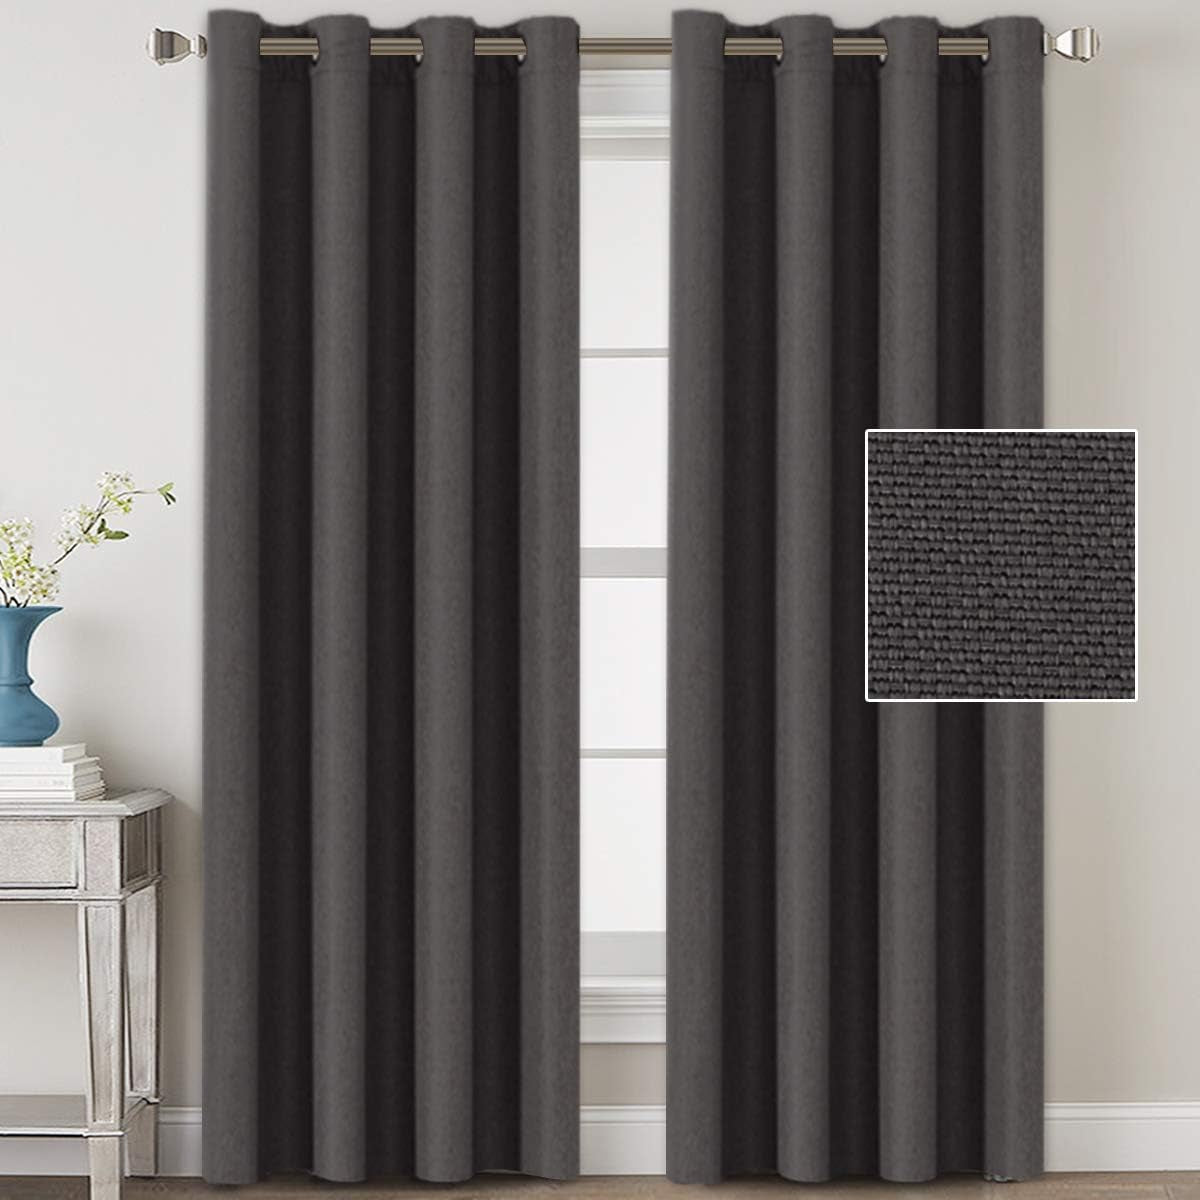 H.VERSAILTEX Linen Blackout Curtains 84 Inches Long Thermal Insulated Room Darkening Linen Curtains for Bedroom Textured Burlap Grommet Window Curtains for Living Room, Bluestone and Taupe, 2 Panels  H.VERSAILTEX Dark Grey 52"W X 108"L 